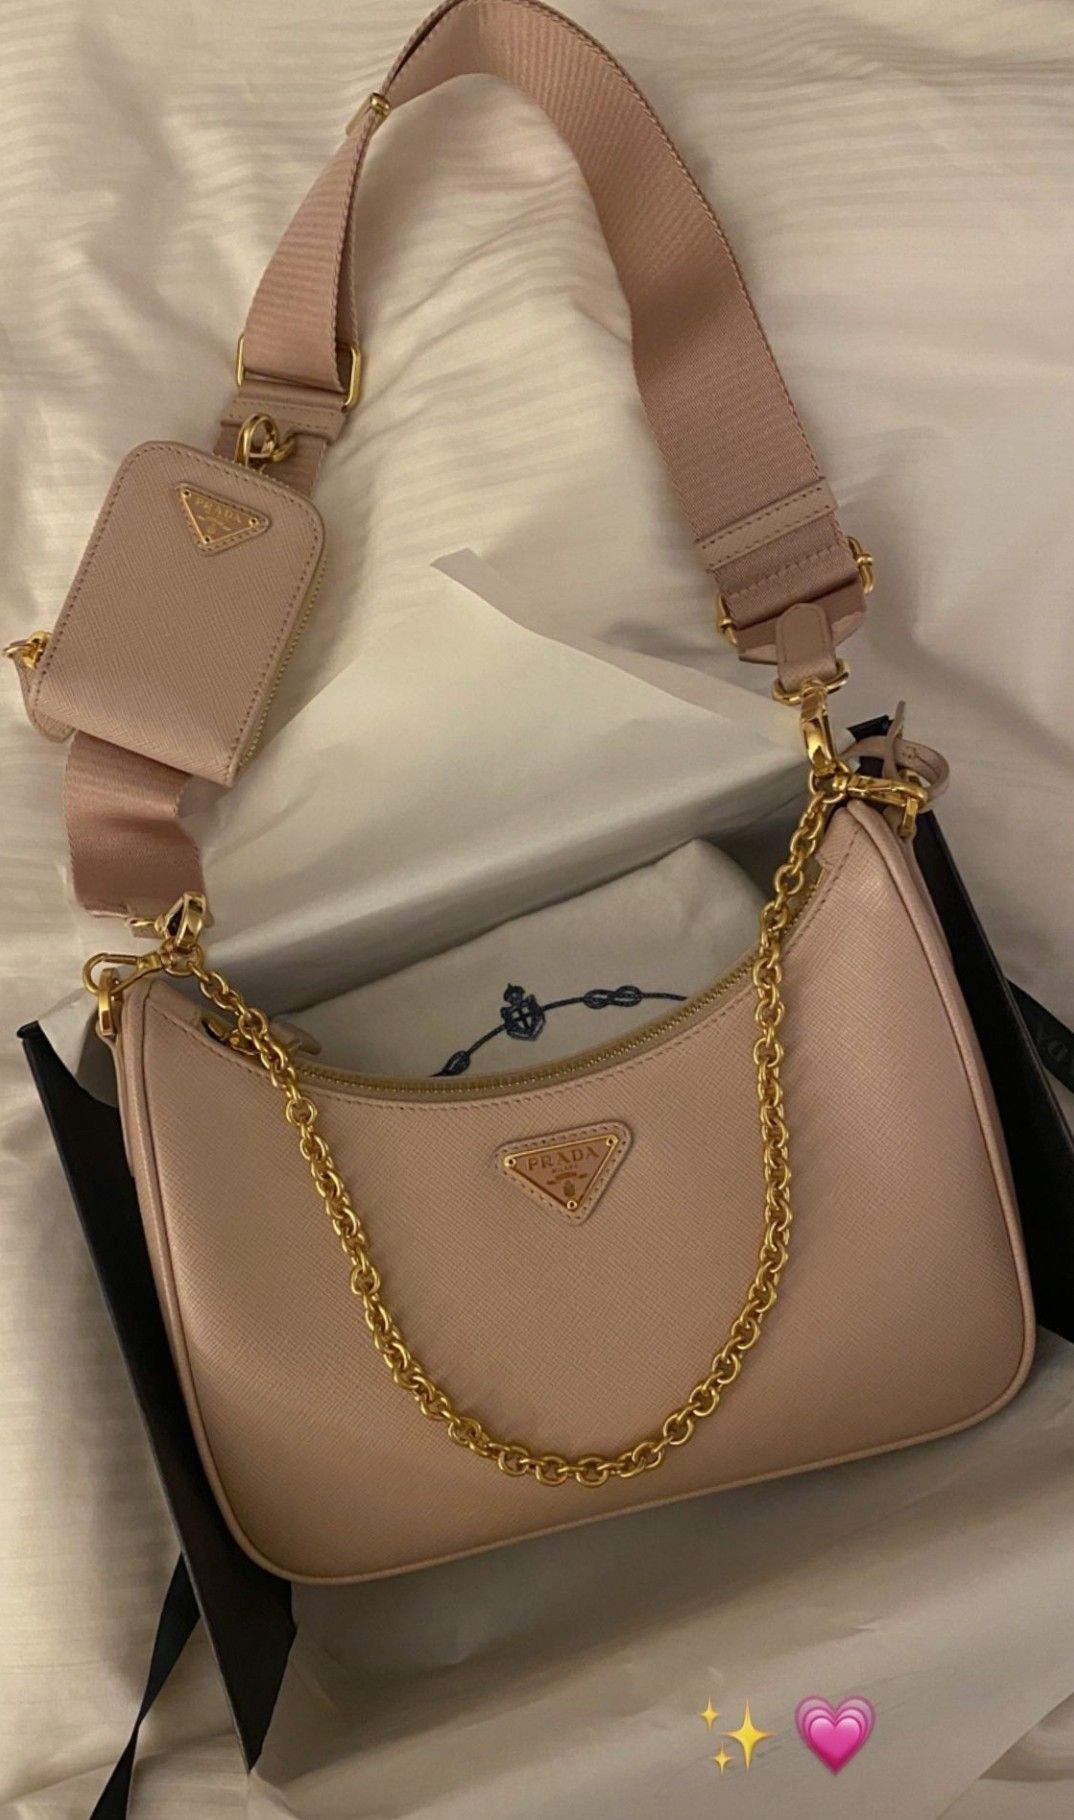 Pink Prada Bag With Pouch